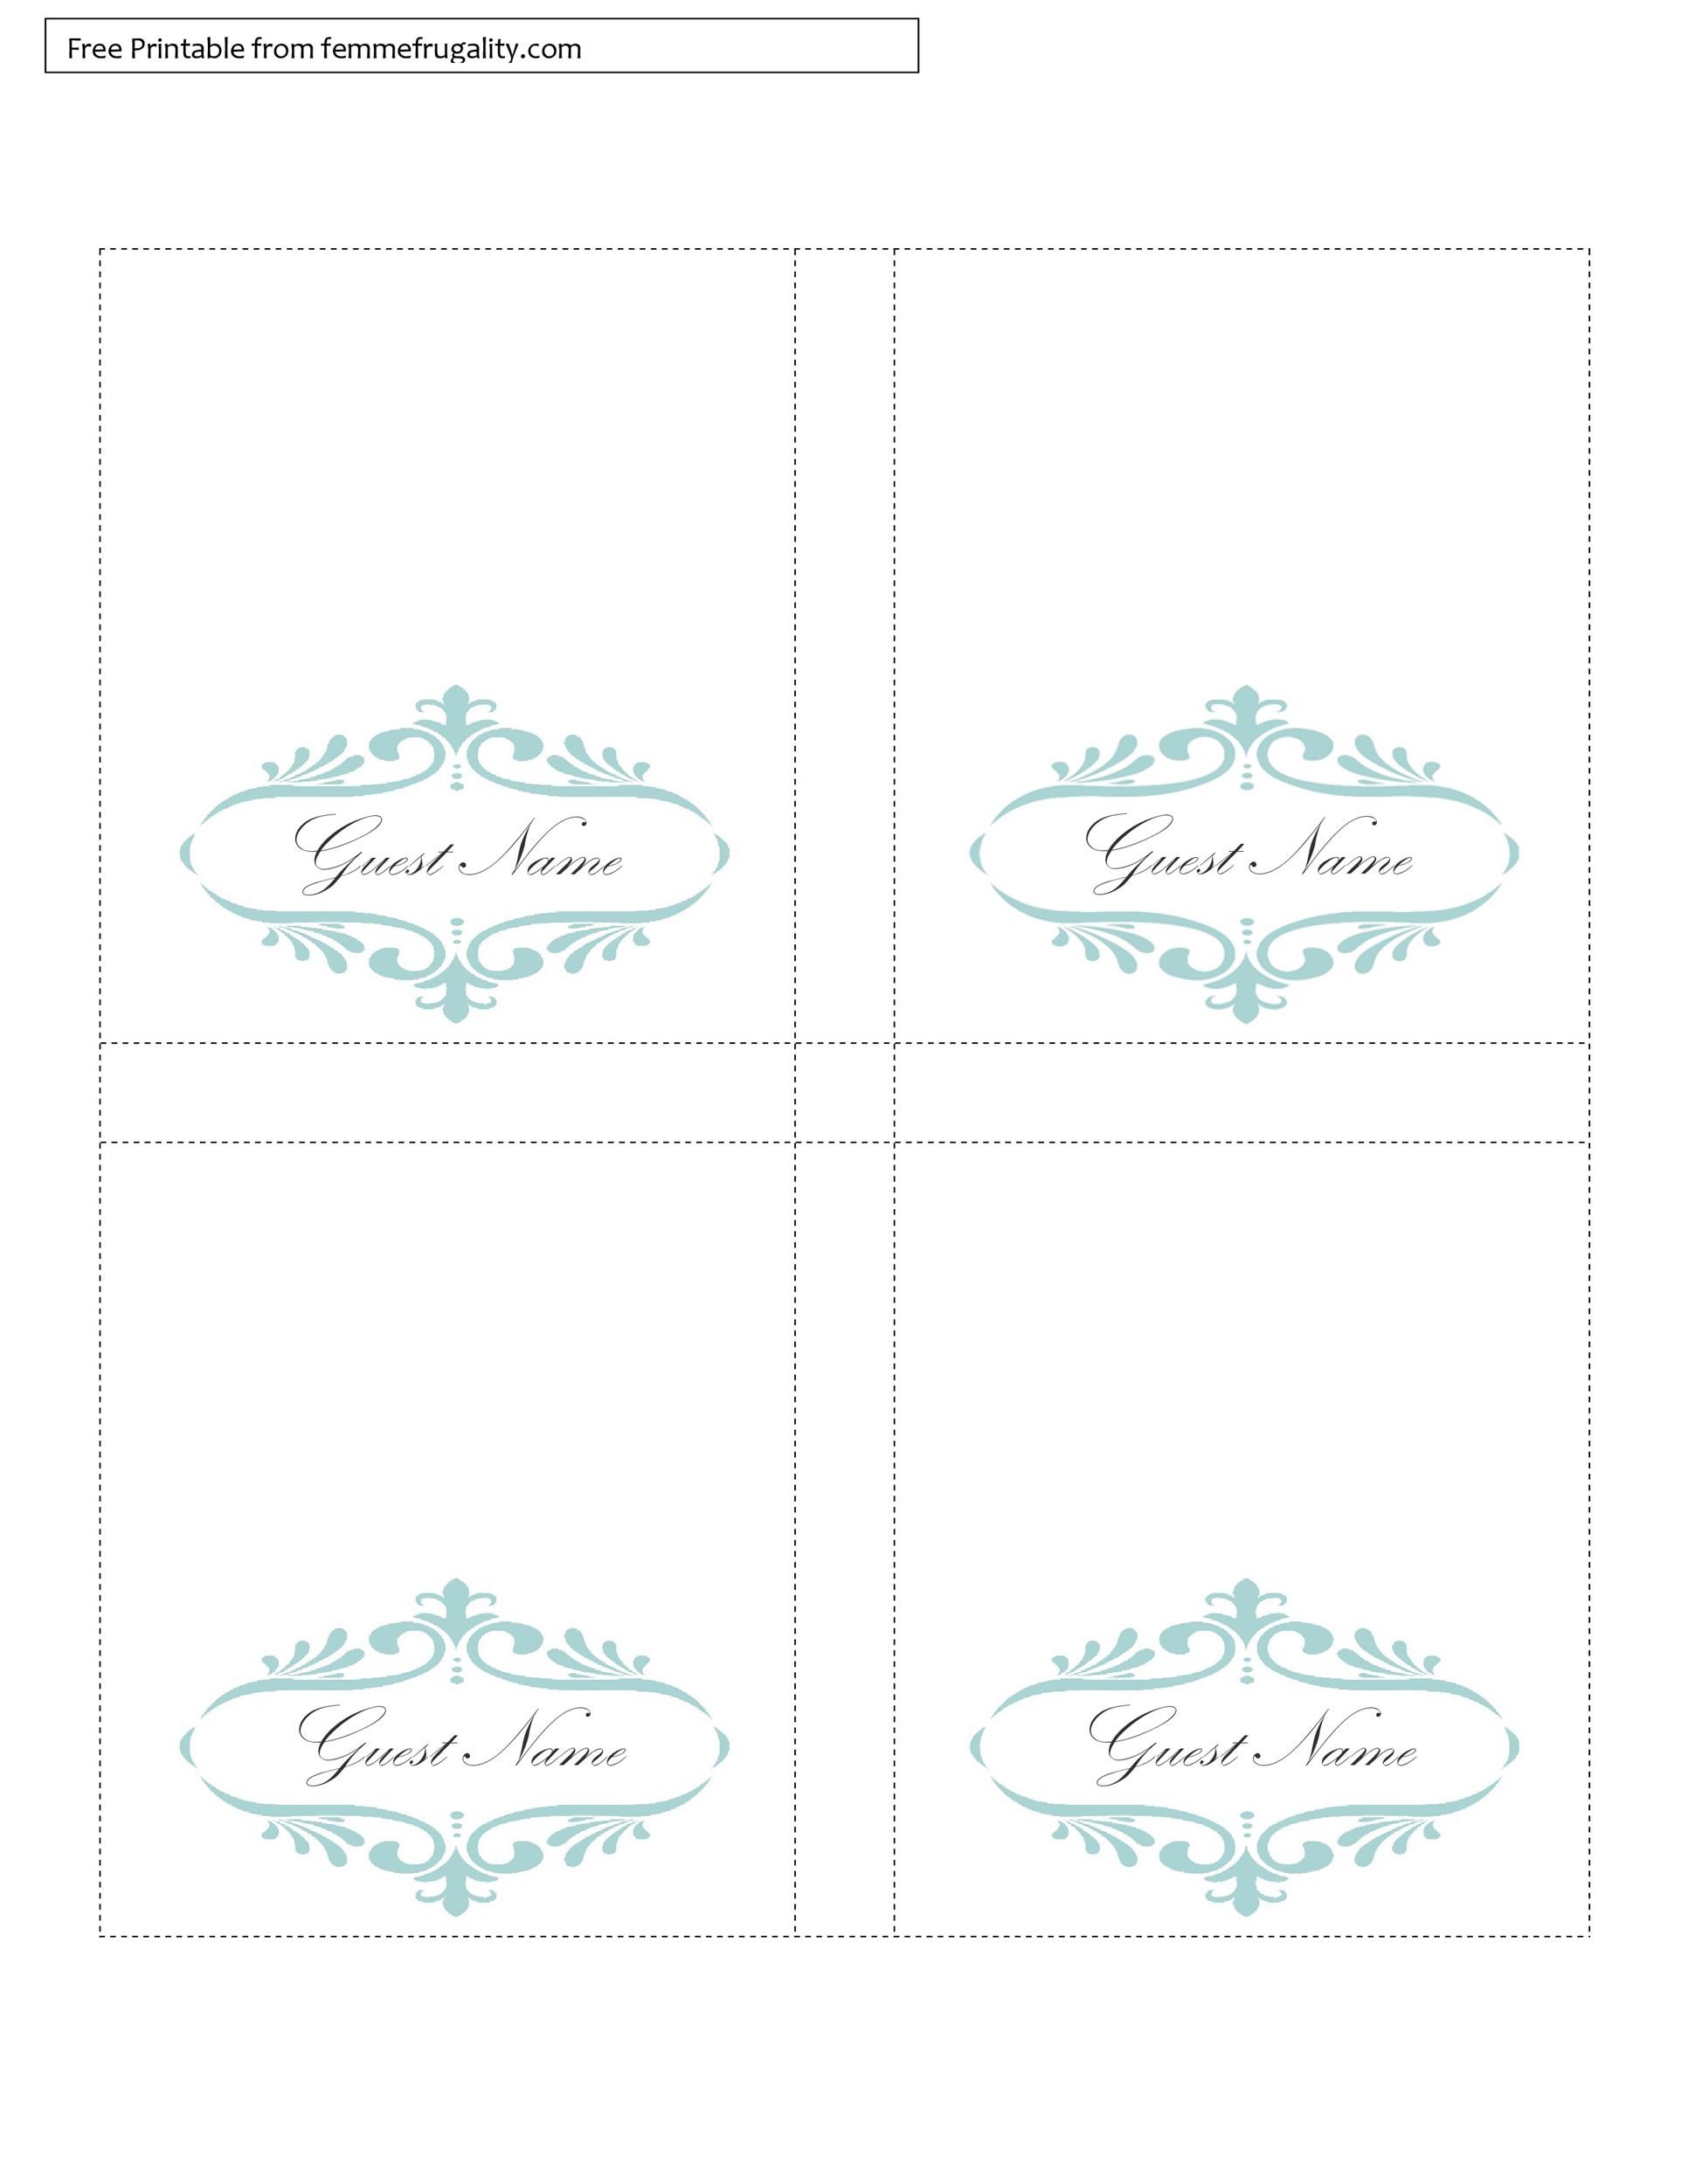 Editable Free Printable Food Labels For Buffet Table - Latest Regarding Free Printable Tent Card Template